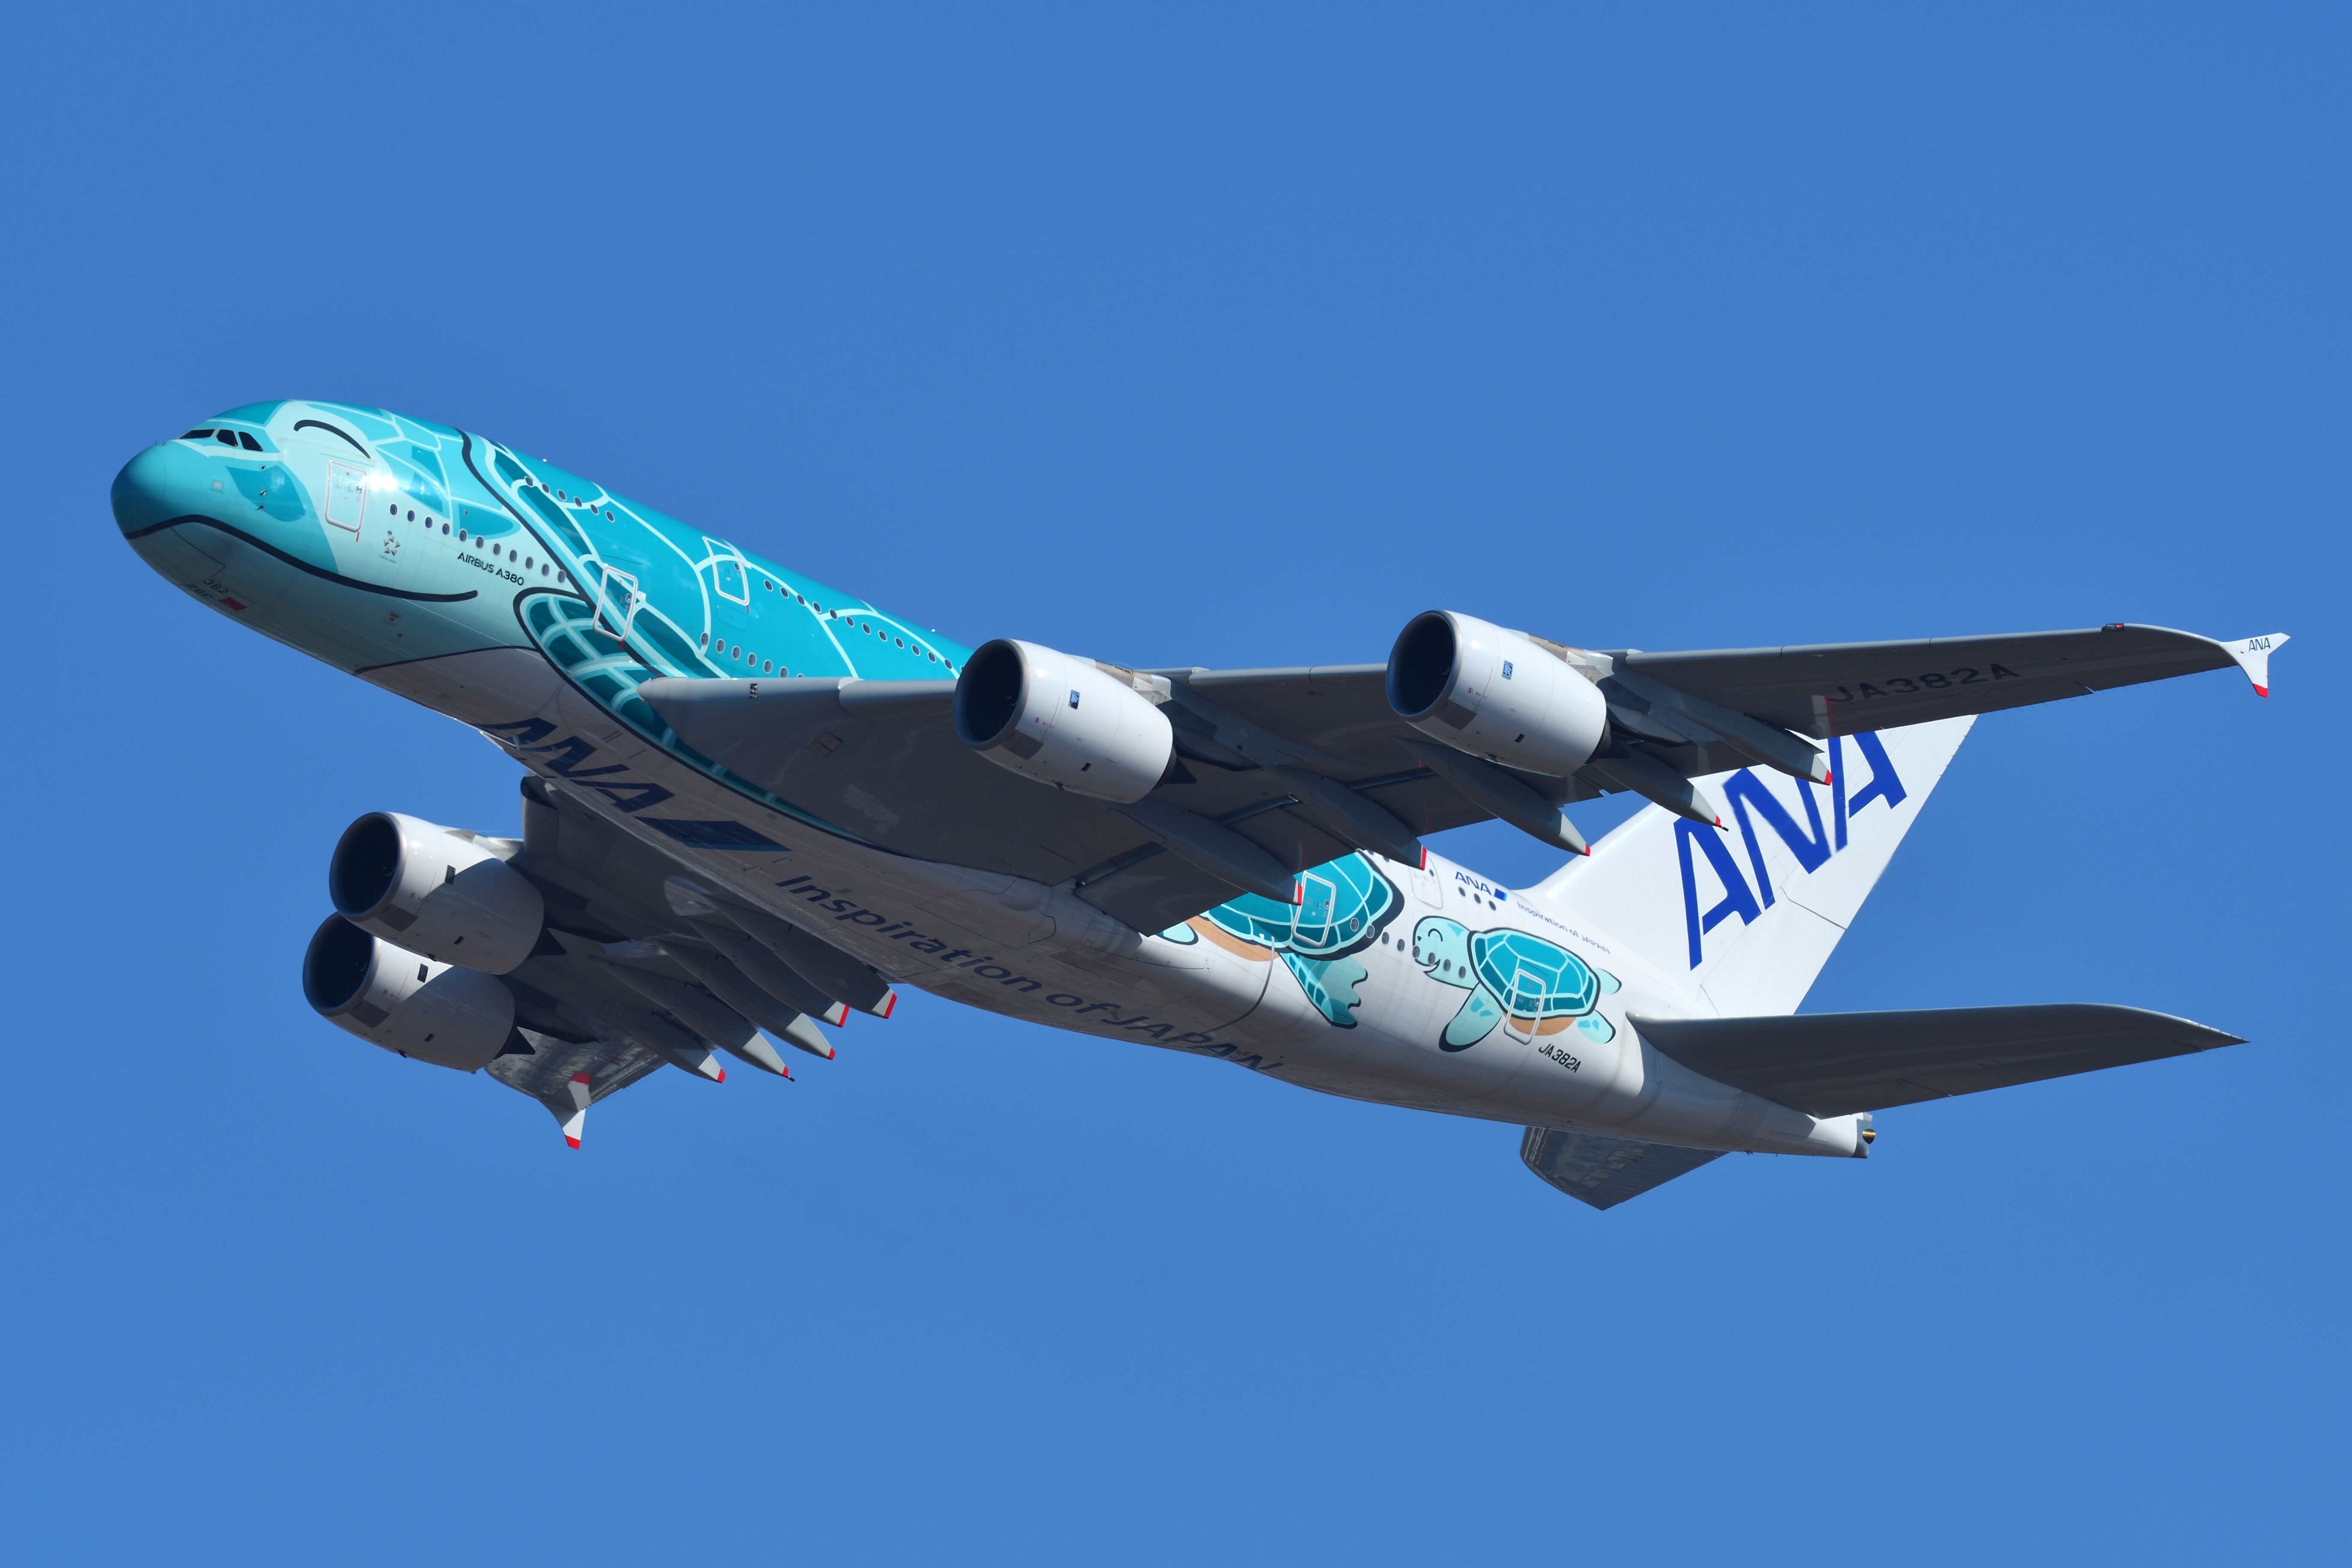 ANA's 'Flying Honu' Airbus A380 Is Heading Back To Hawaii